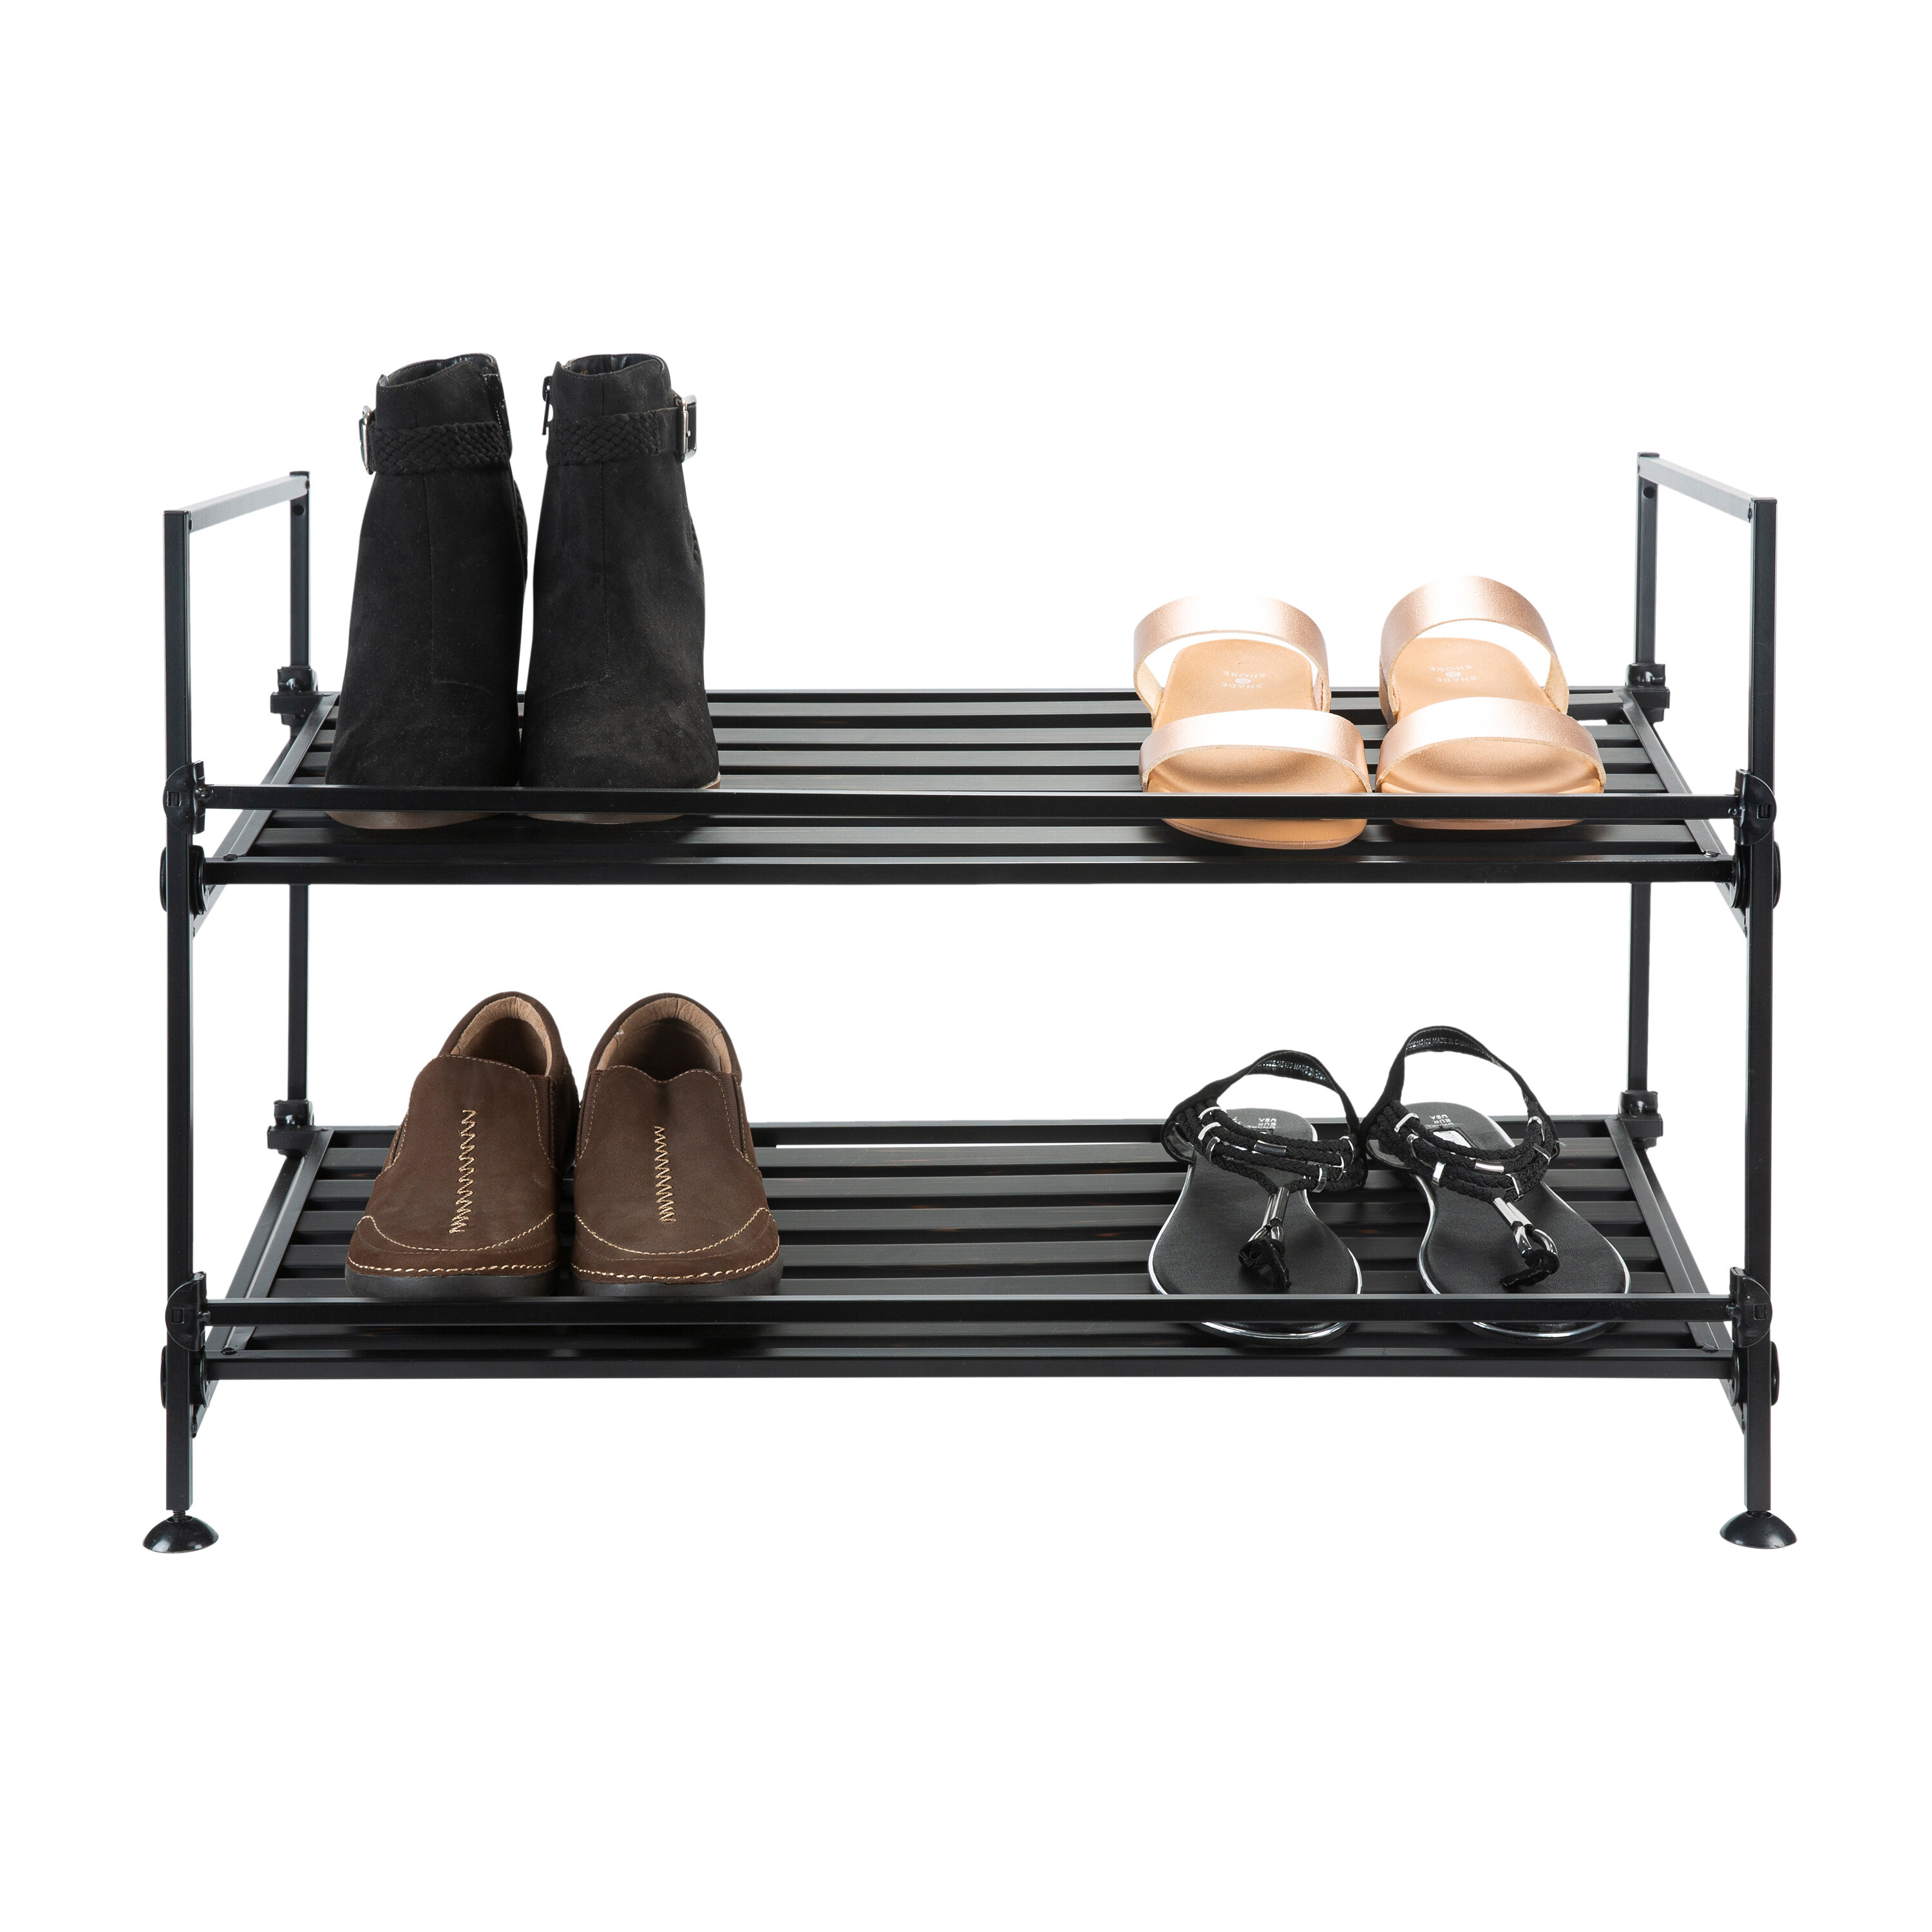 10 Tier Shoe Rack Extendable & Stackable Organiser for 12 7 4 21 & 30 Pairs 